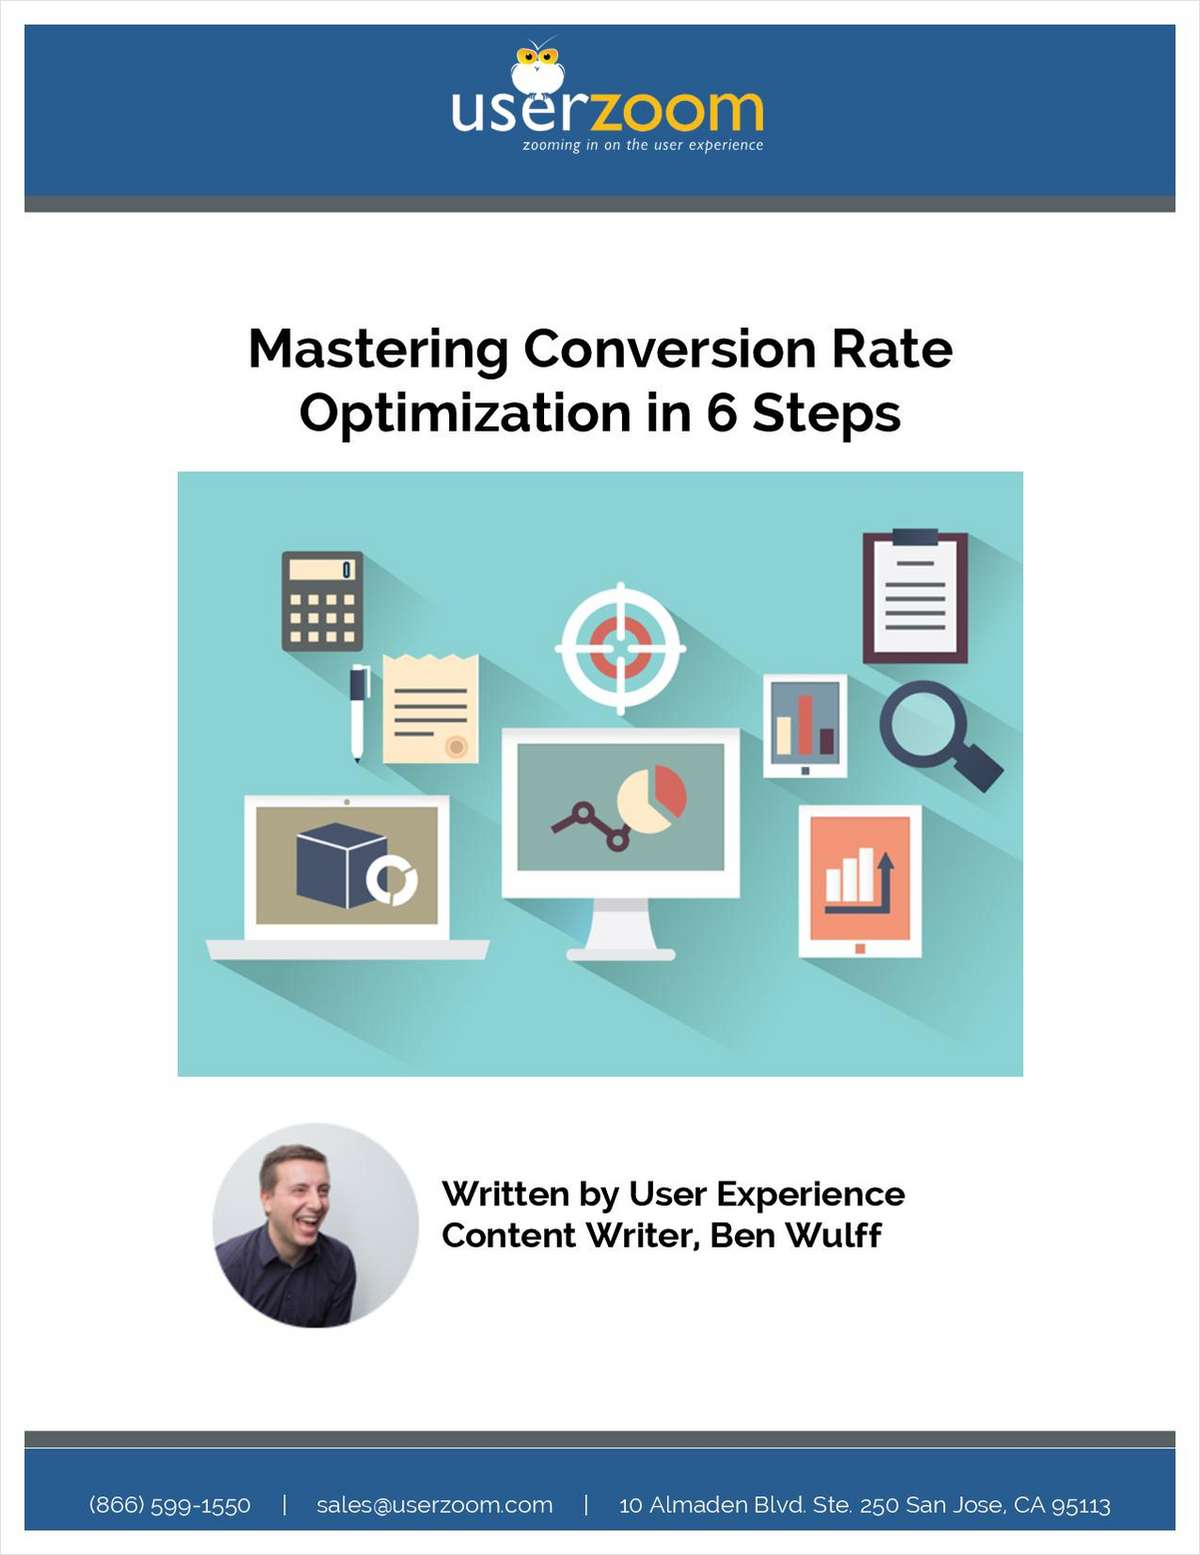 6 Quick Steps to Improve Conversion Rates